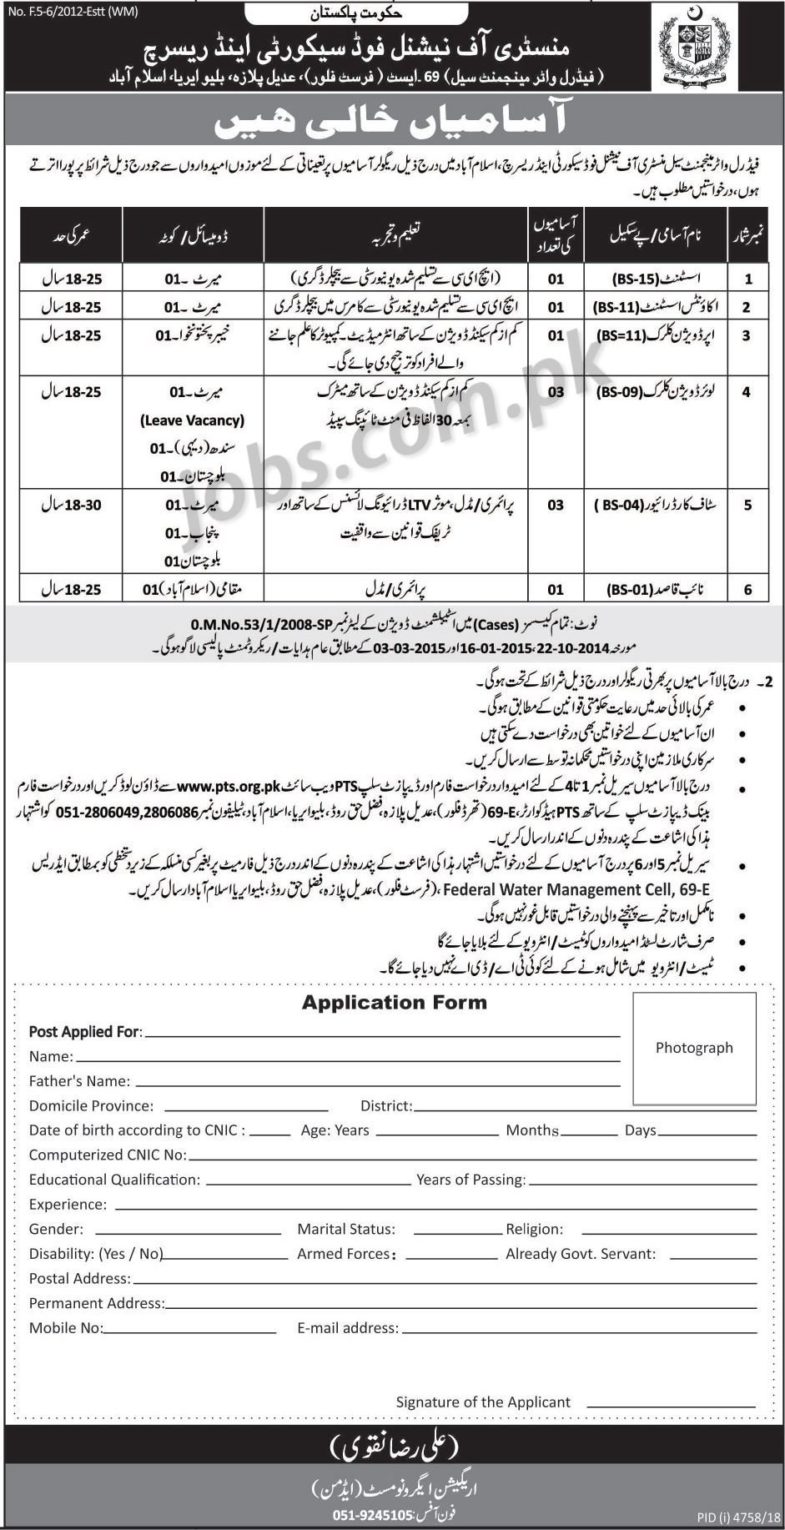 Ministry of National Food Security & Research Jobs 2019 for 10+ Assistant, Accounts, LDC/UDC Clerks, Drivers & Support Staff (Download PTS Form)